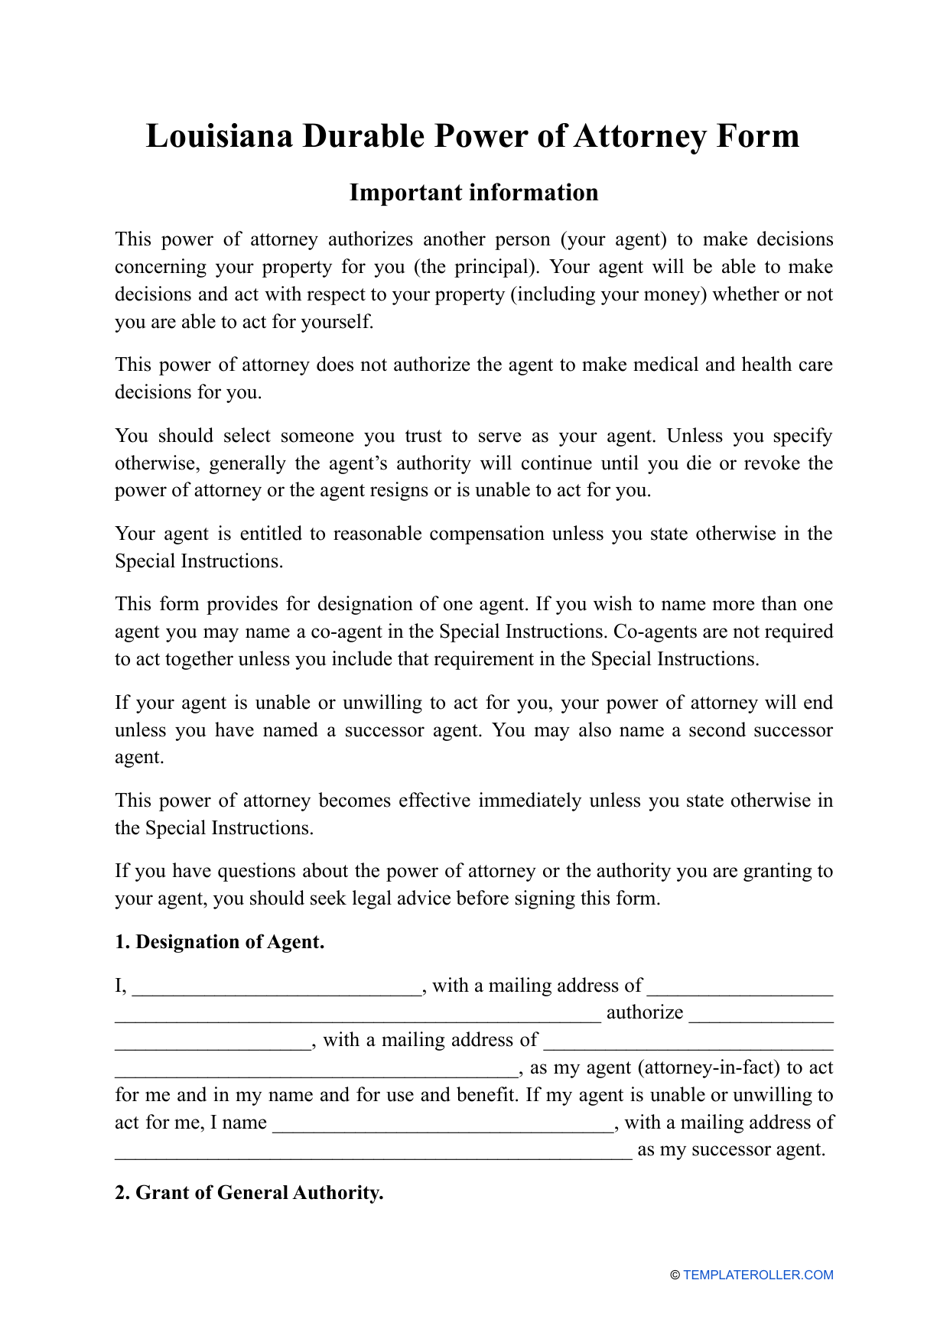 Durable Power of Attorney Form - Louisiana, Page 1